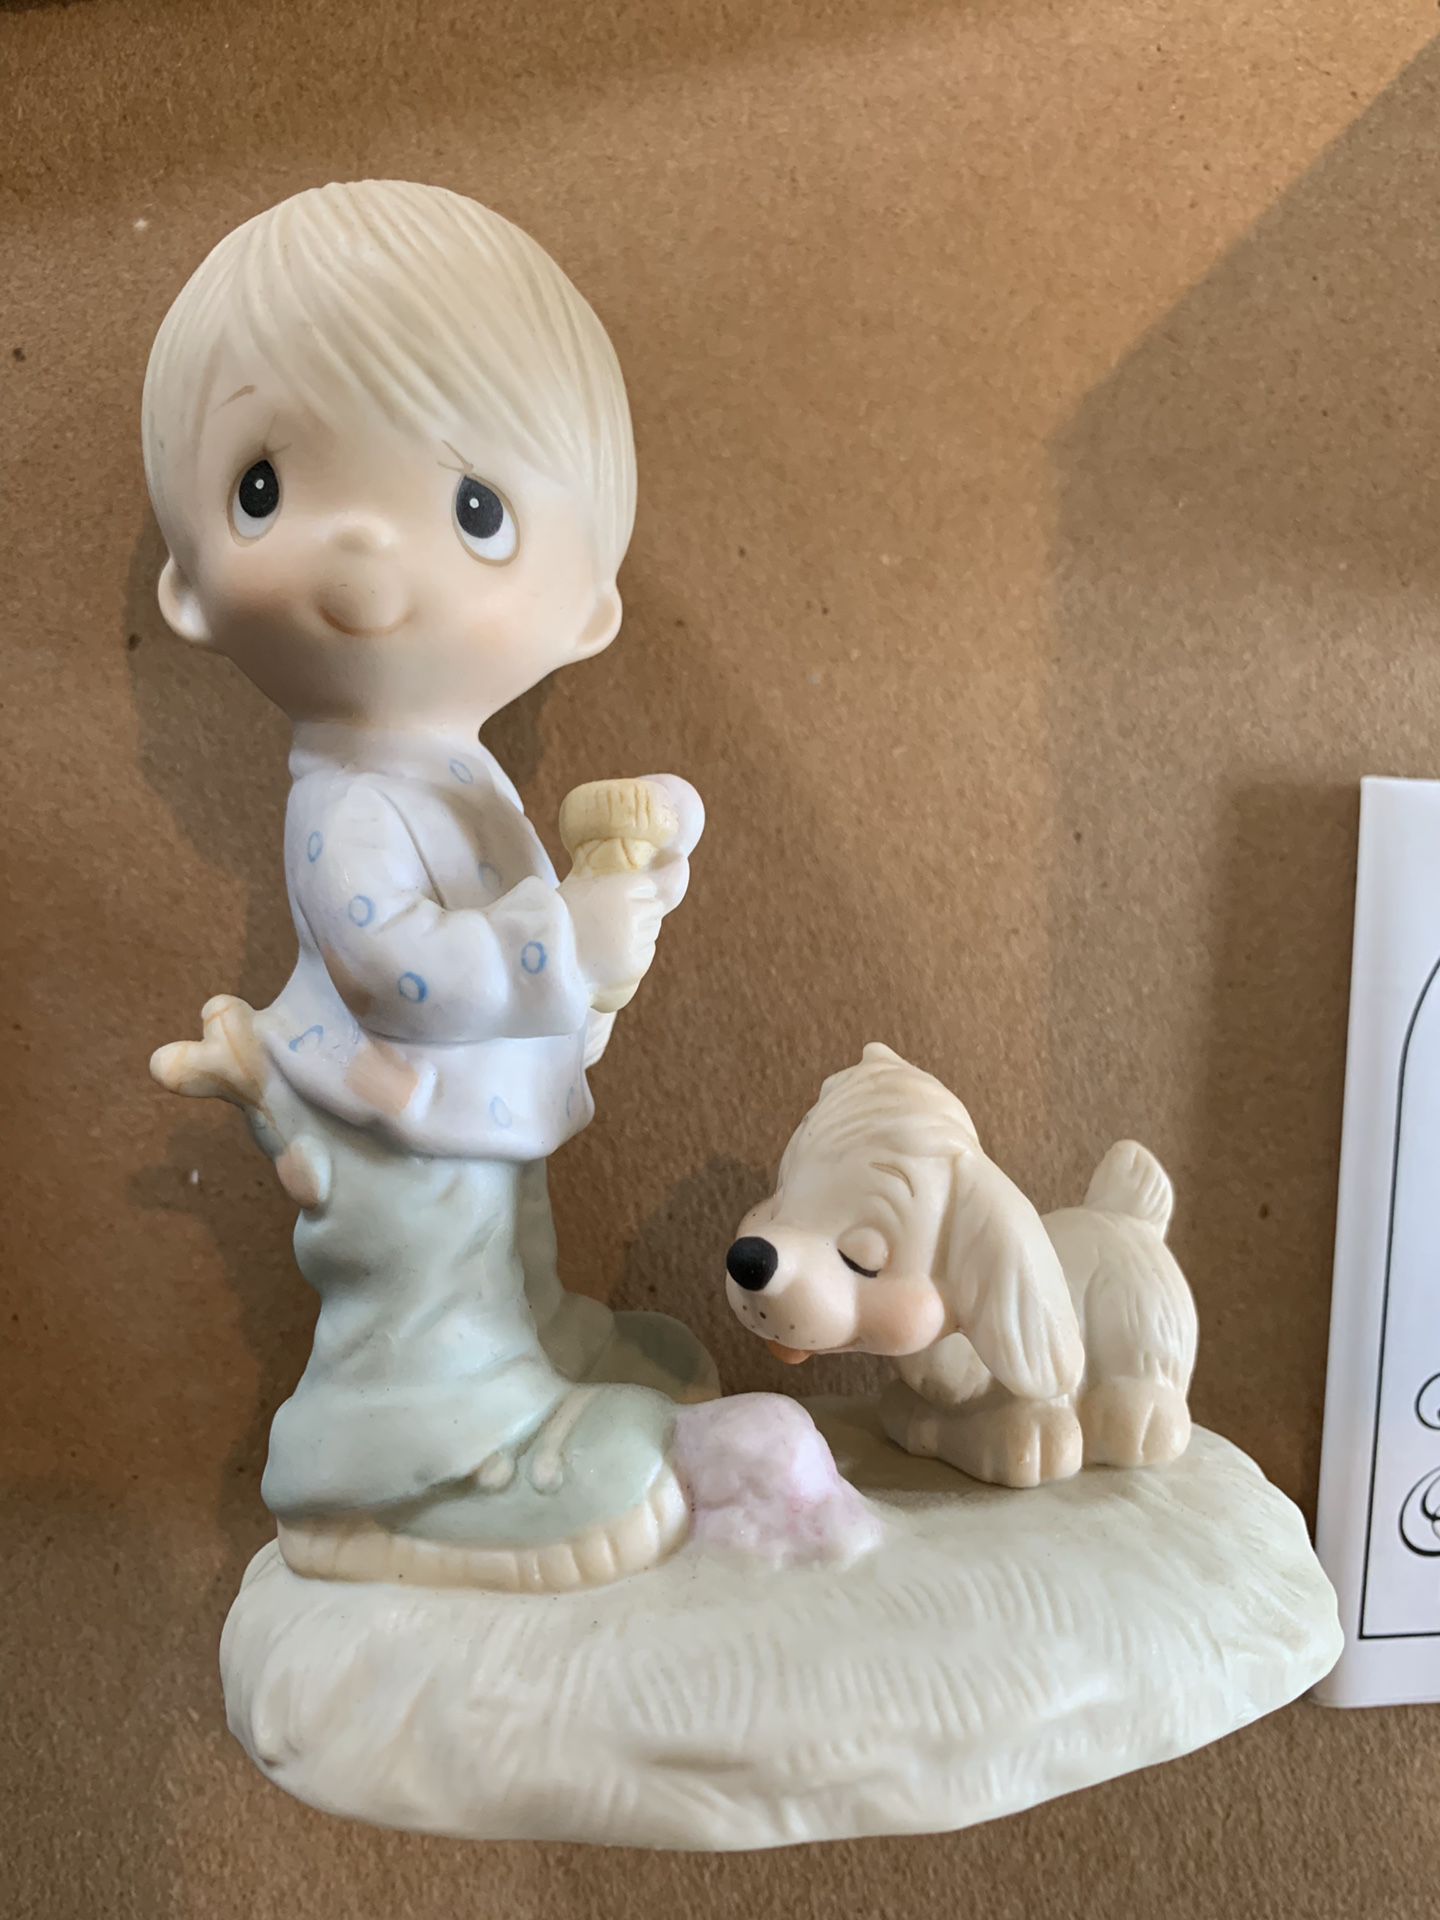 8 Precious Moments $15 each or $80 for all